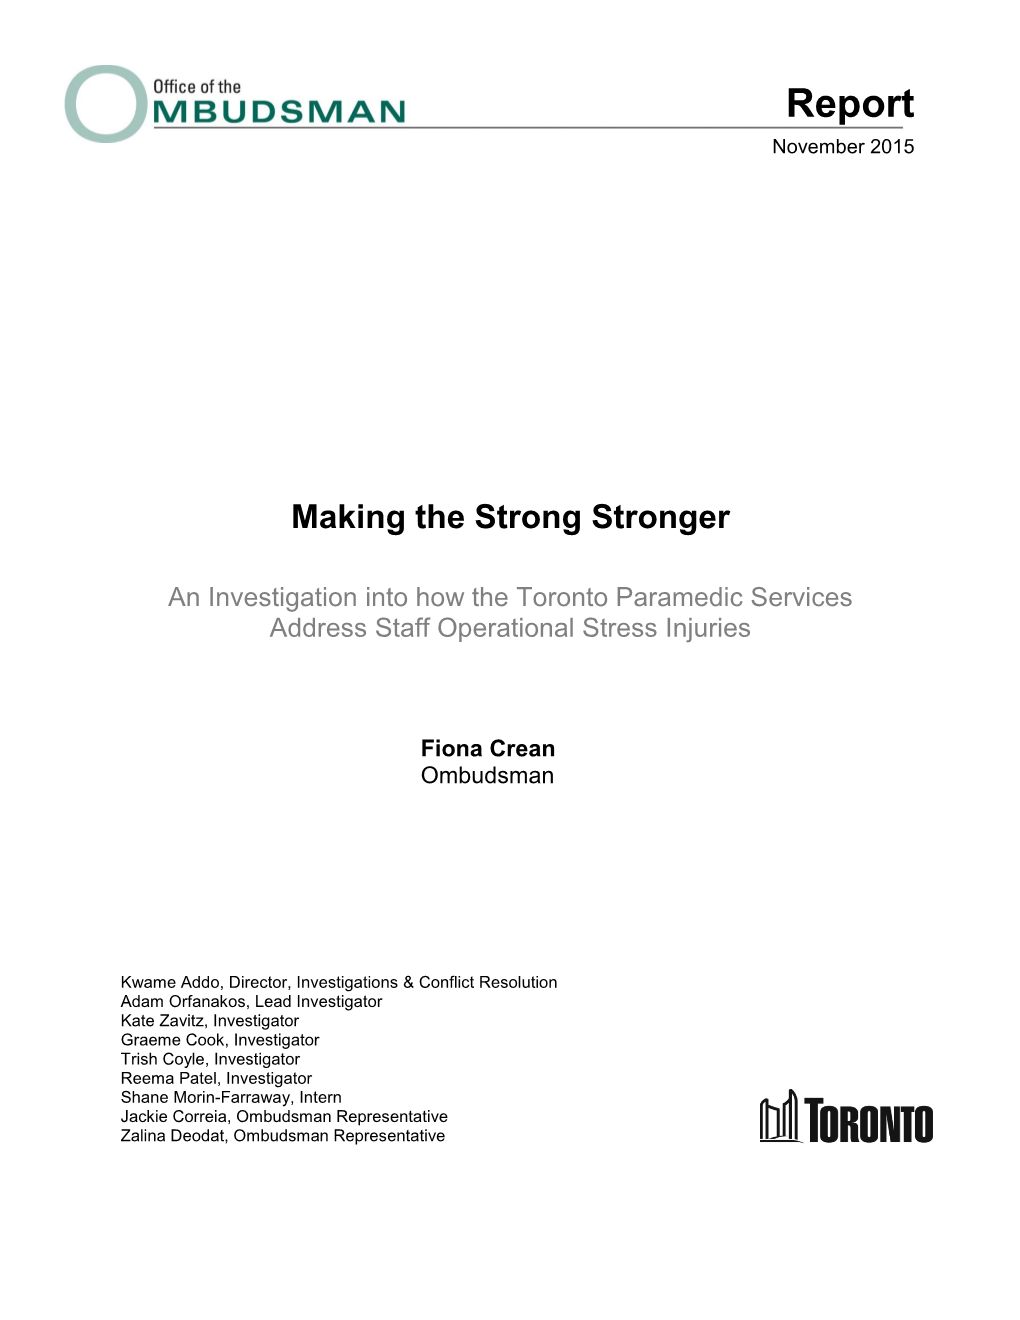 An Investigation Into How the Toronto Paramedic Services Address Staff Operational Stress Injuries